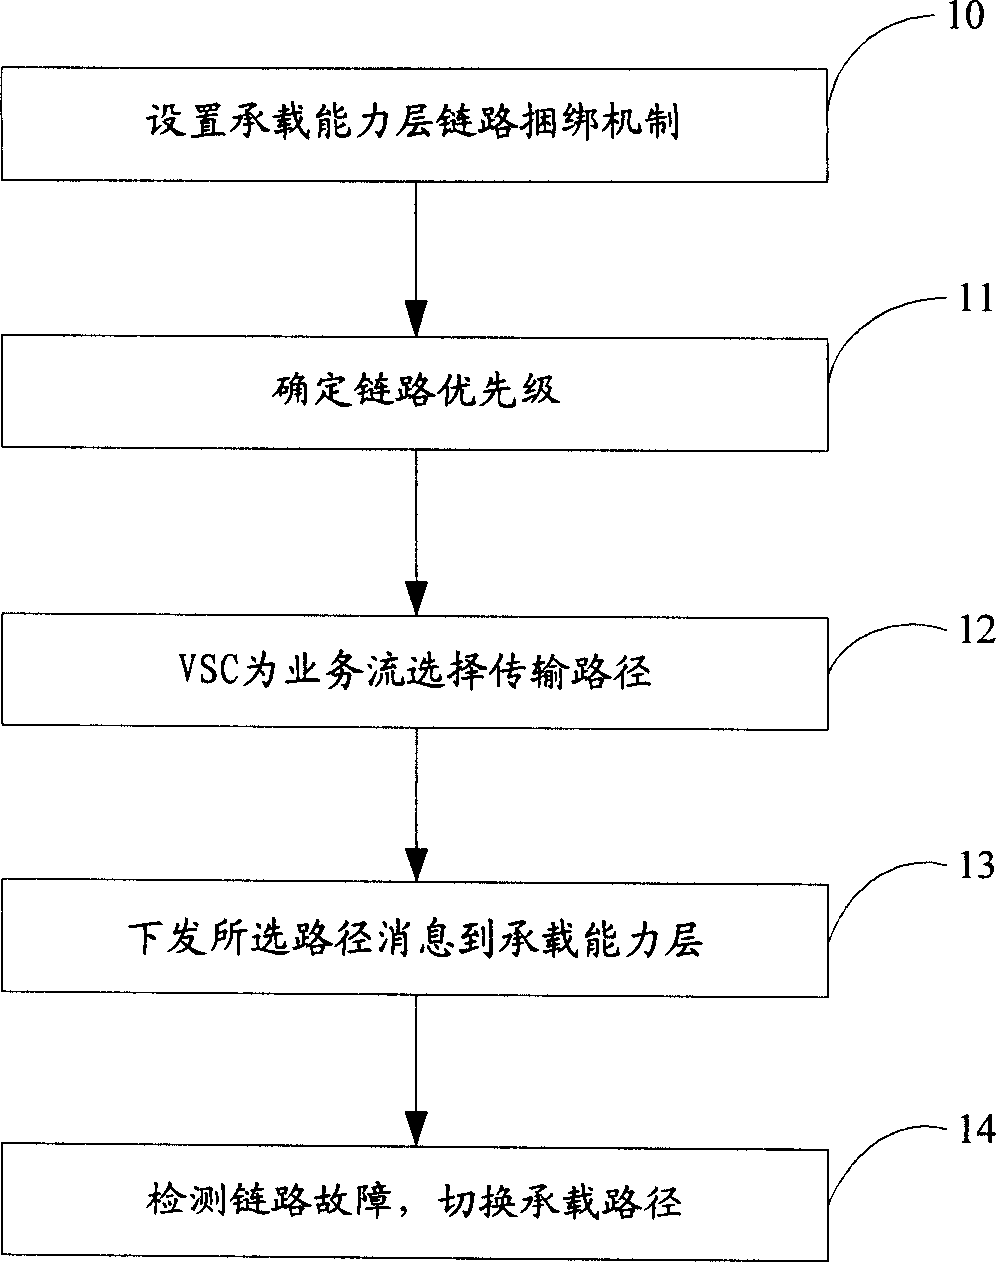 Method for raising transmission reliability in virtual exchange system